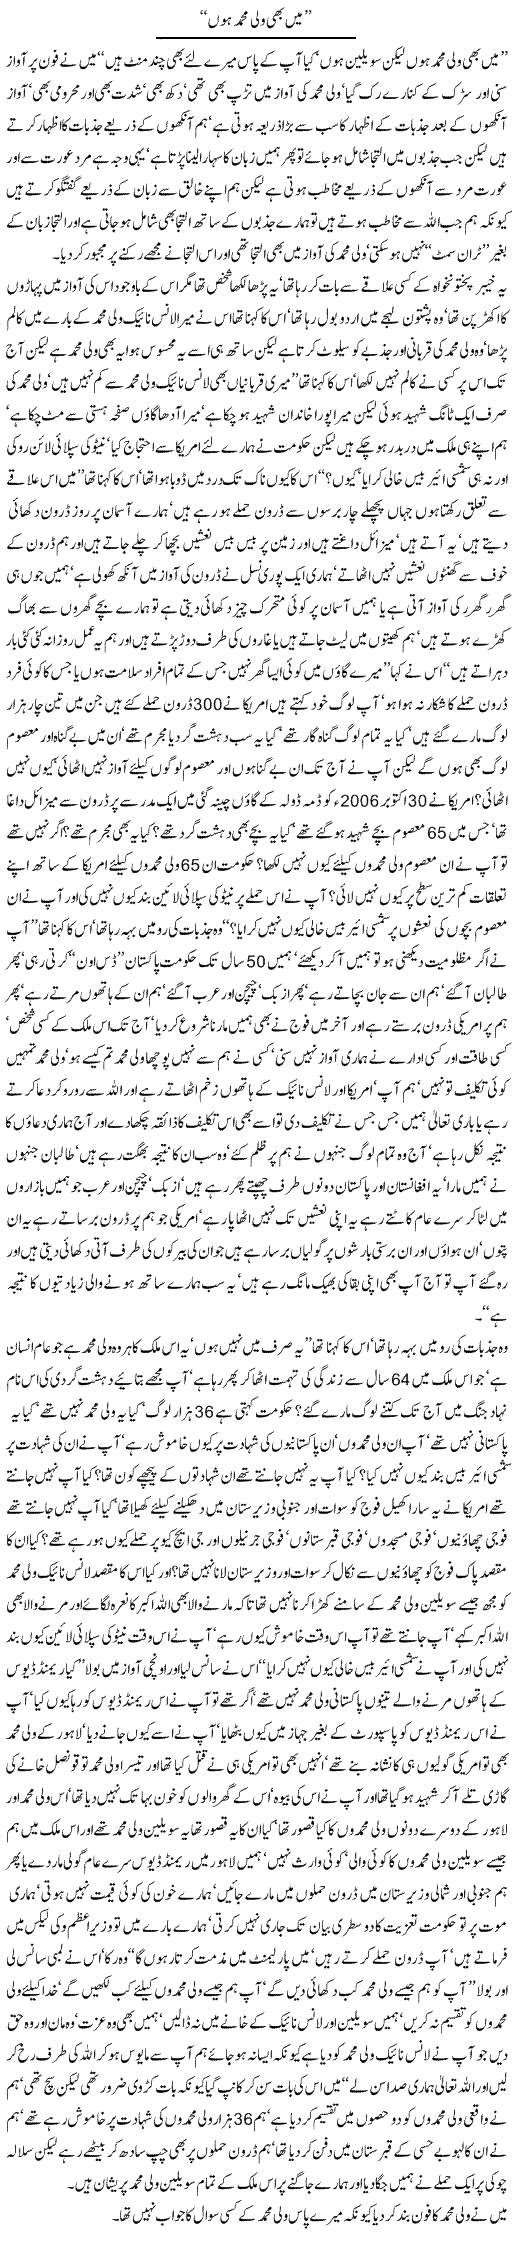 Civilian Deaths By America Express Column Javed Chaudhry 2 December 2011